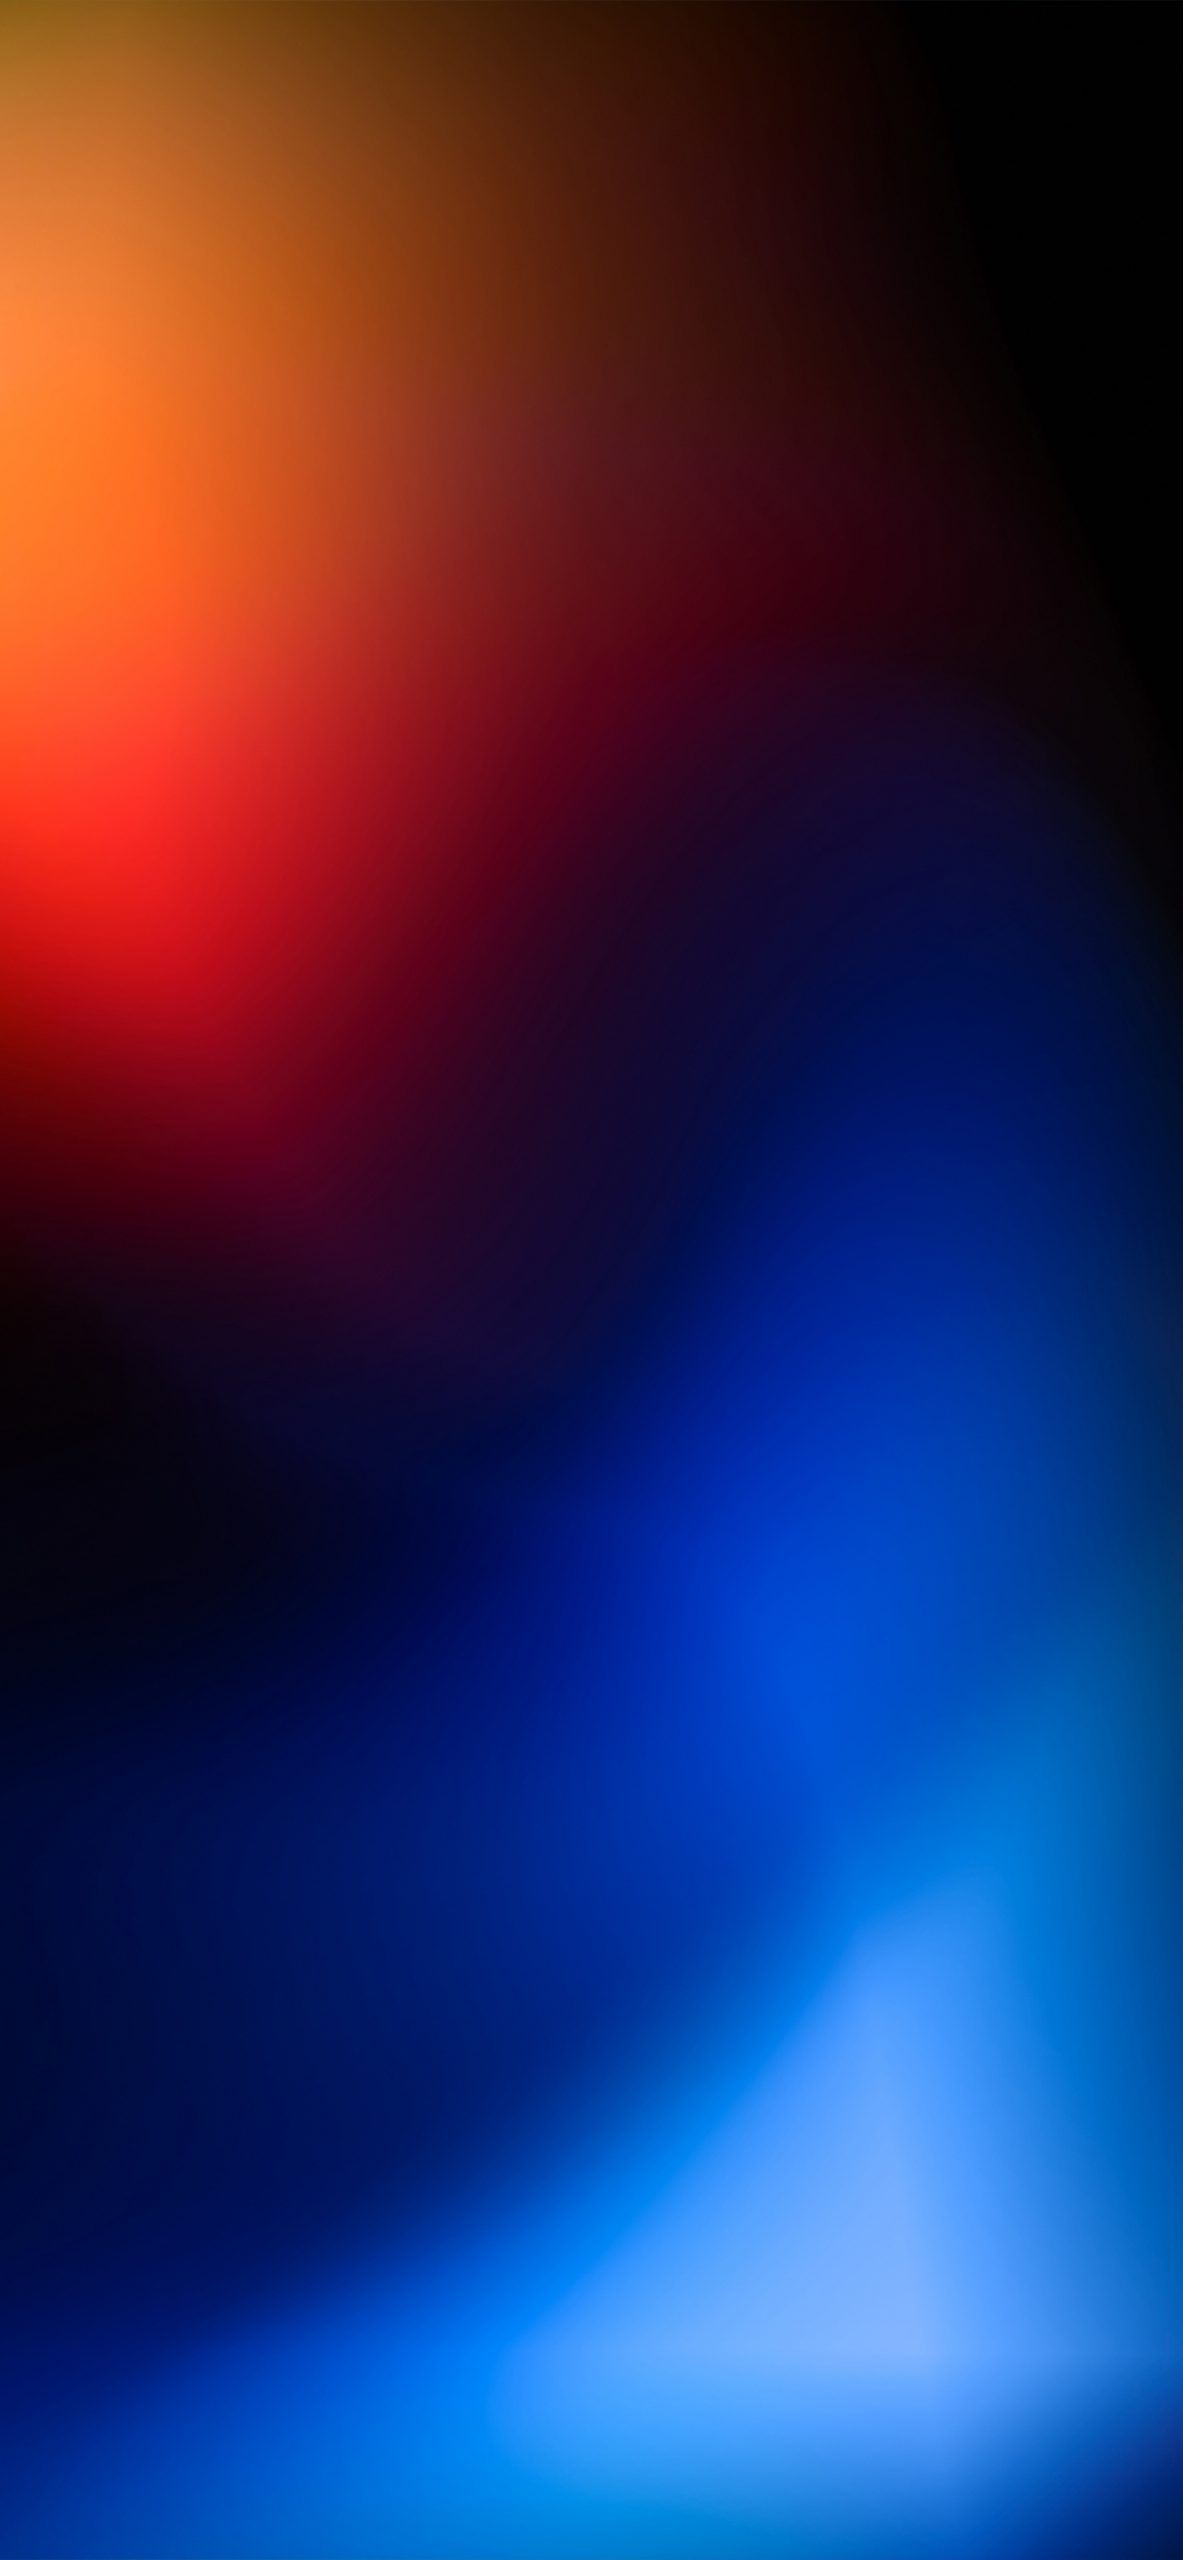 Orange to blue and black gradient on iPhone. iPhone wallpaper bright, iPhone wallpaper gradient, Colourful wallpaper iphone